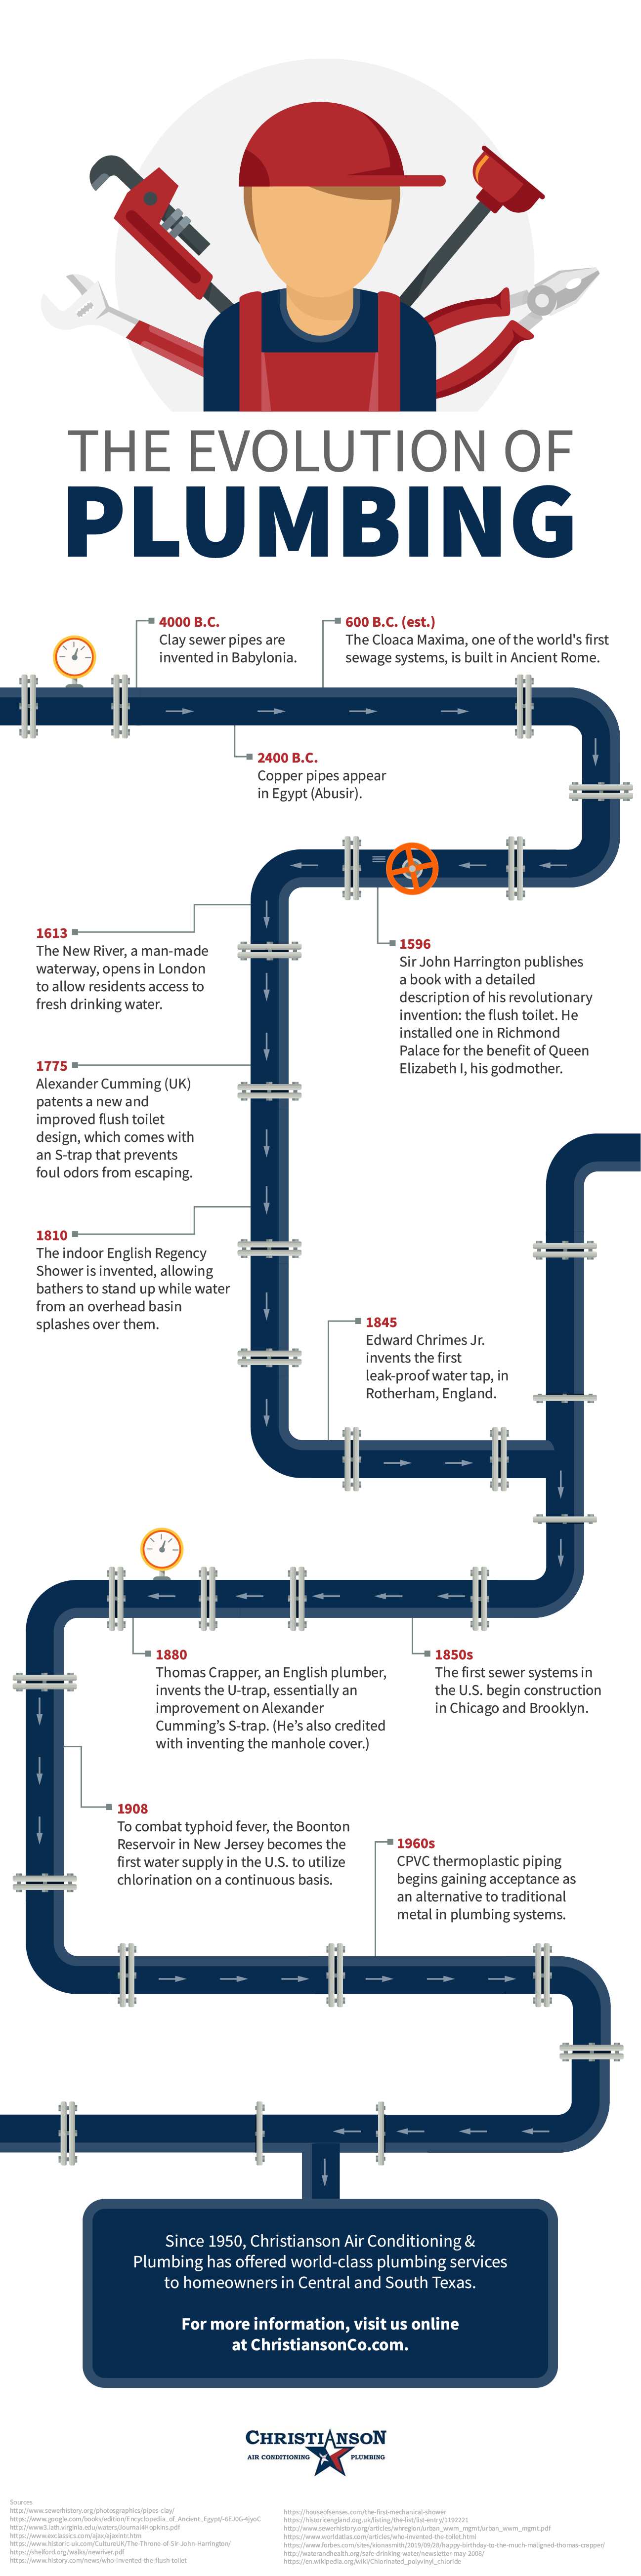 The Evolution of Plumbing Infographic